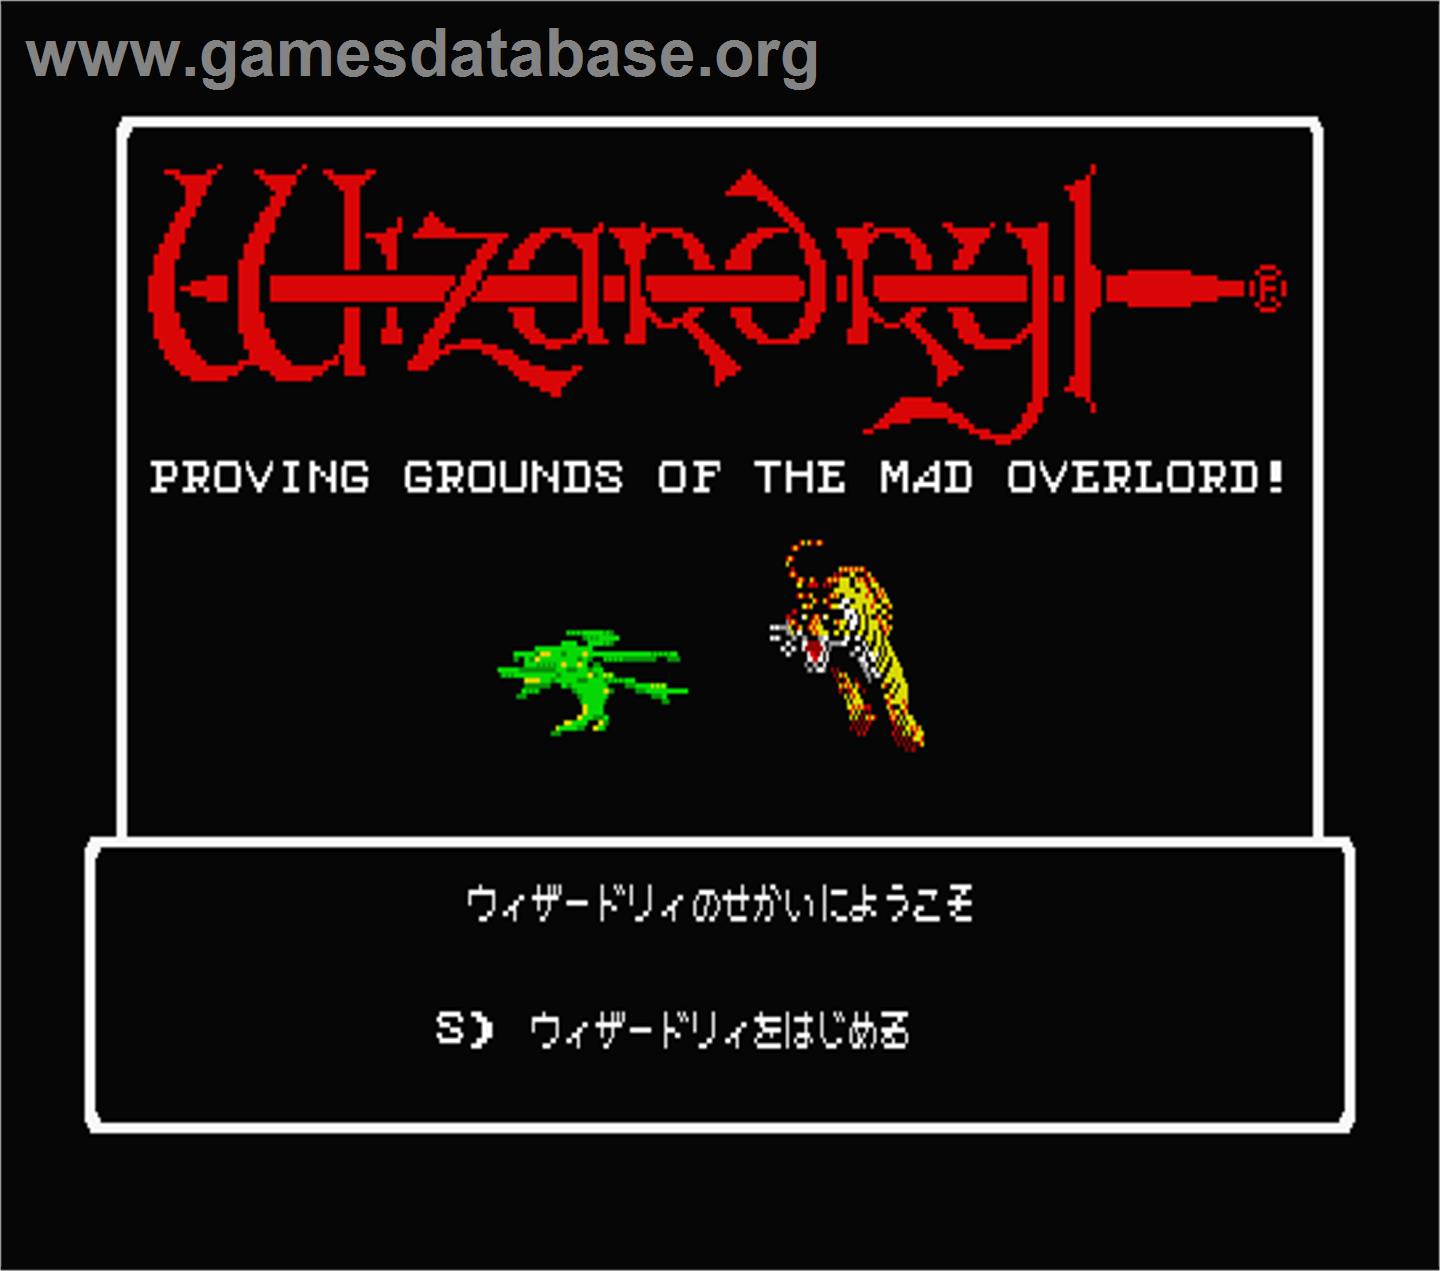 Wizardry: Proving Grounds of the Mad Overlord - MSX 2 - Artwork - Title Screen